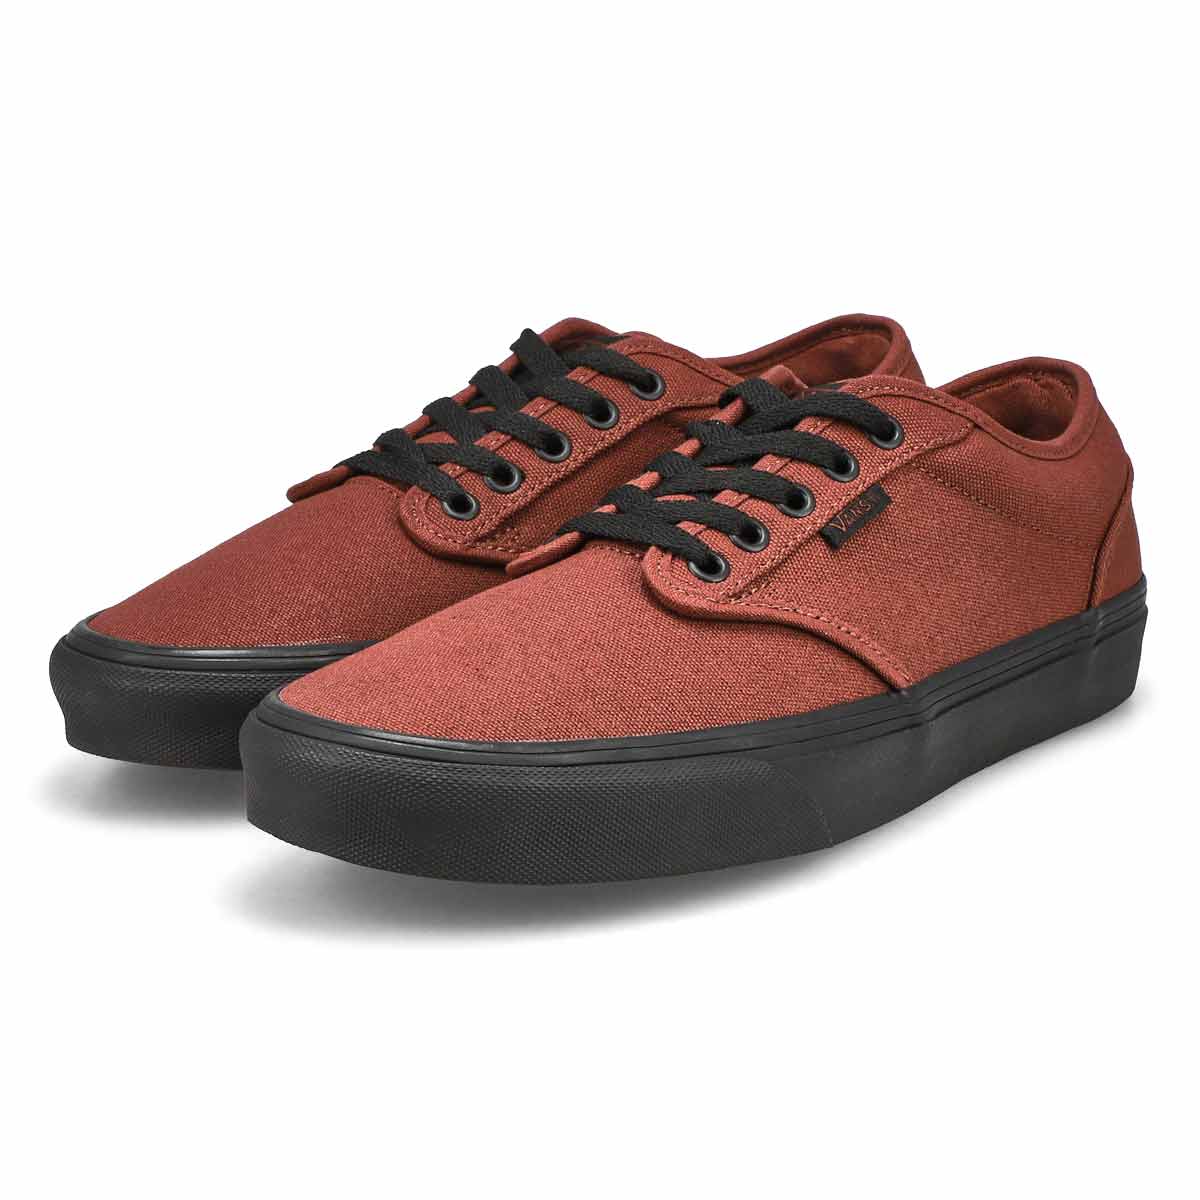 Men's Atwood Canvas Lace Up Sneaker - RootBeer